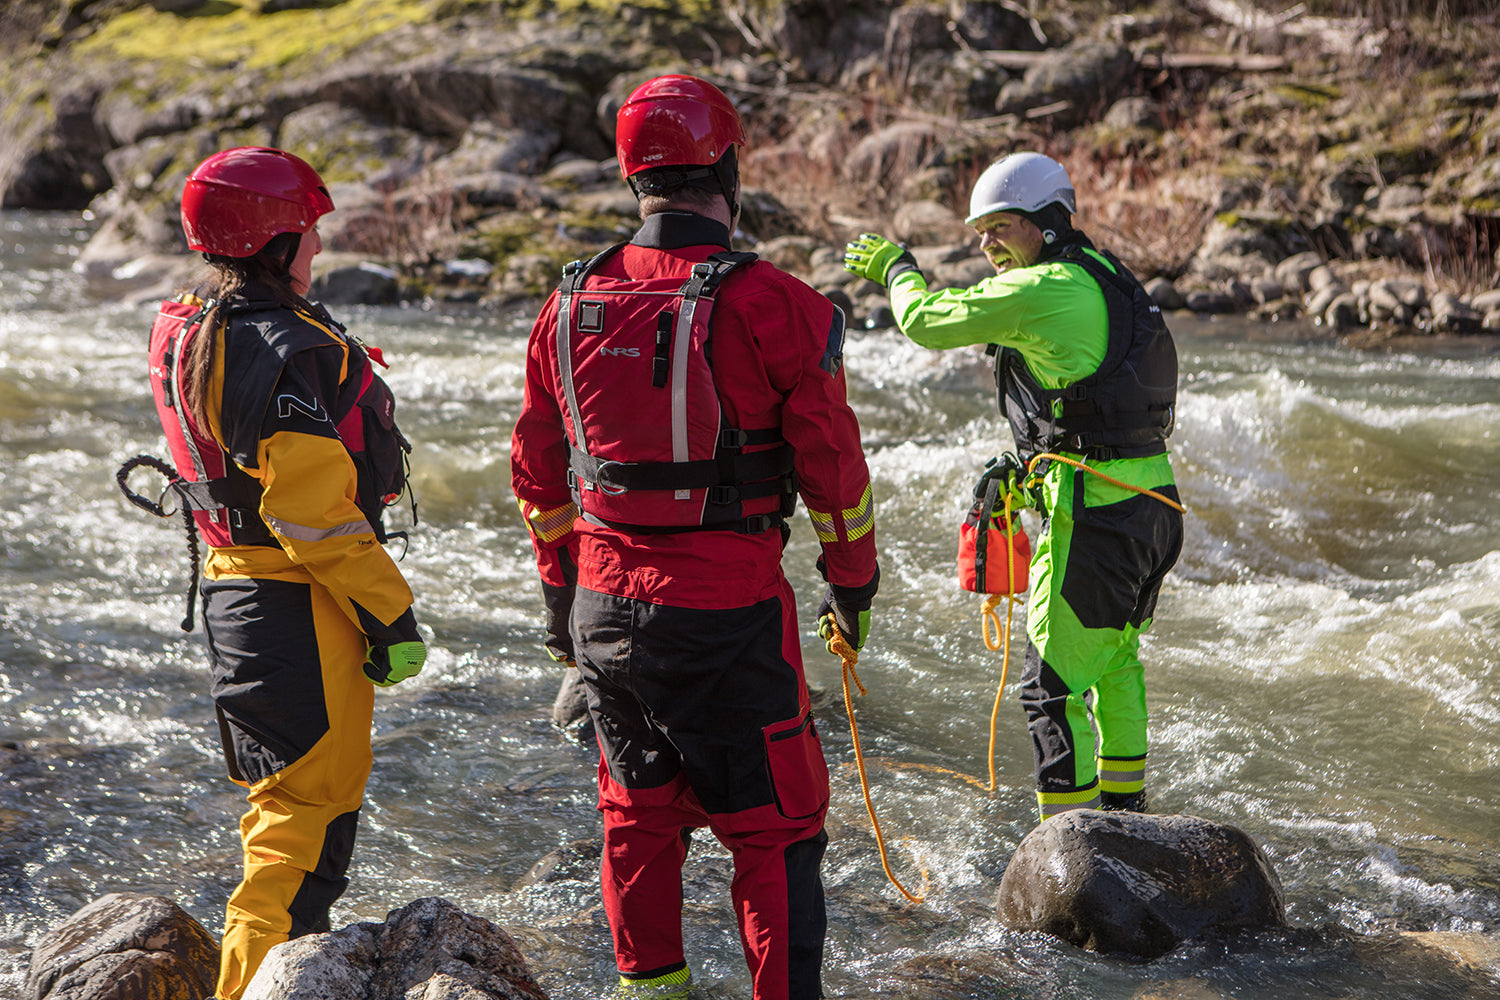 Throw Bag and Rope Rescues  For Whitewater and Swiftwater